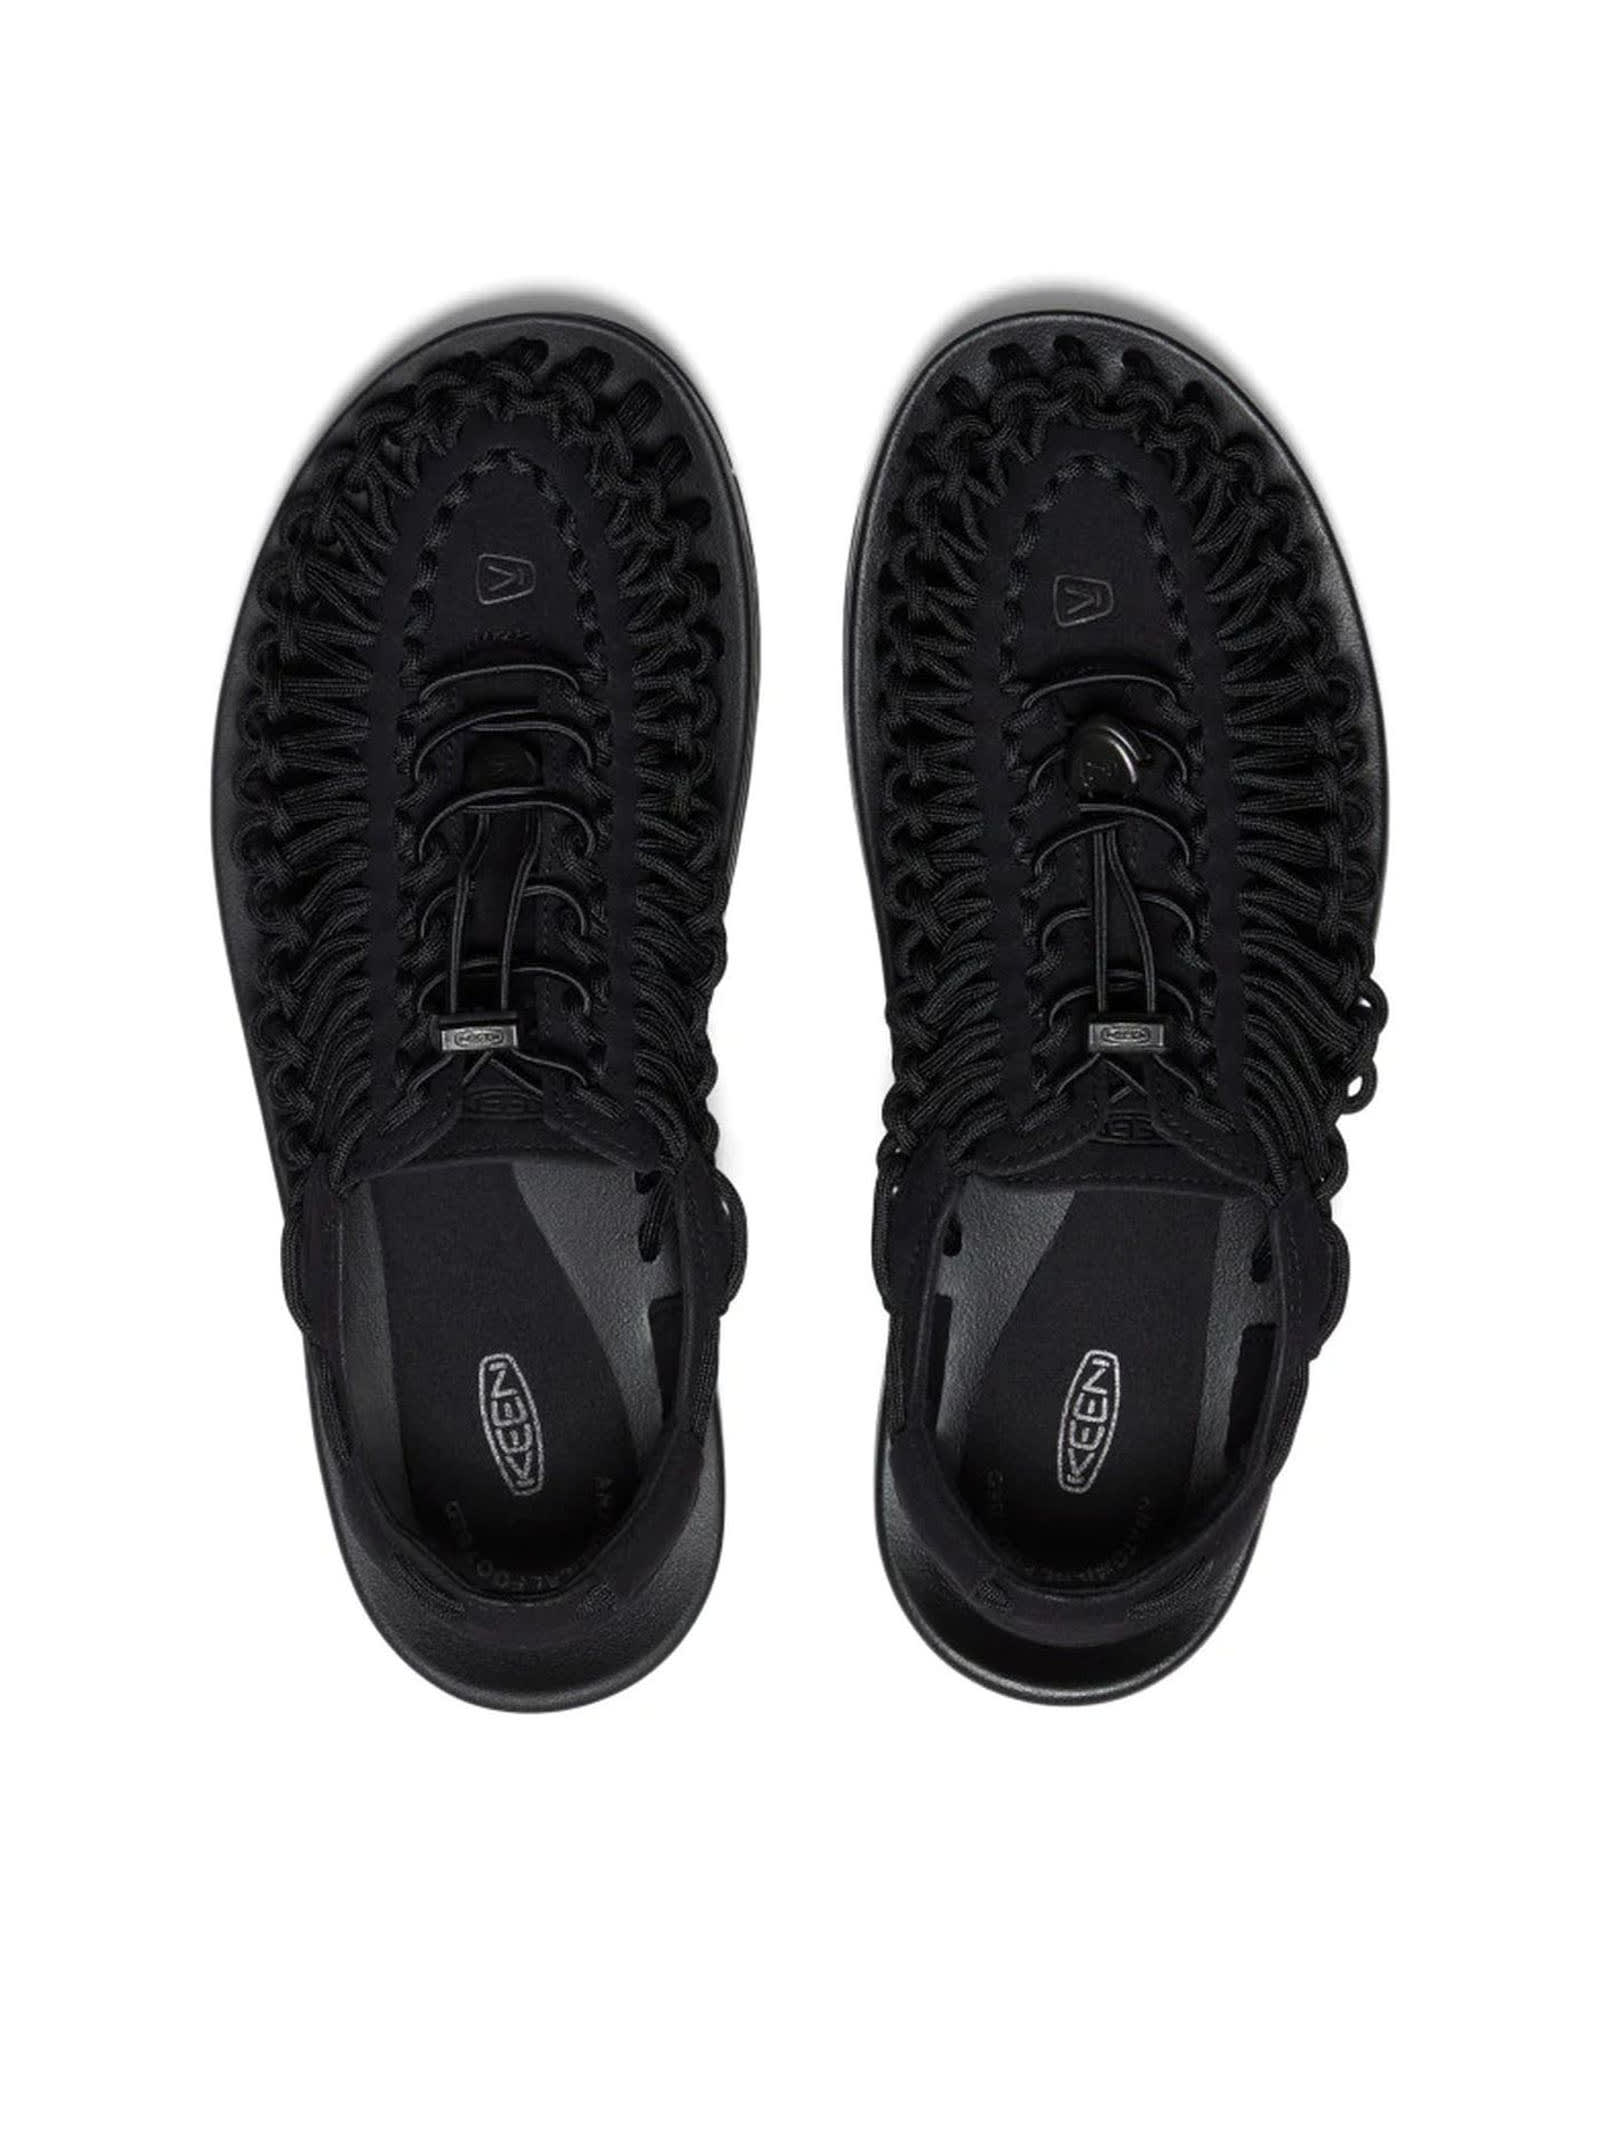 Shop Keen Black Two-cord Construction Sandals In Nero